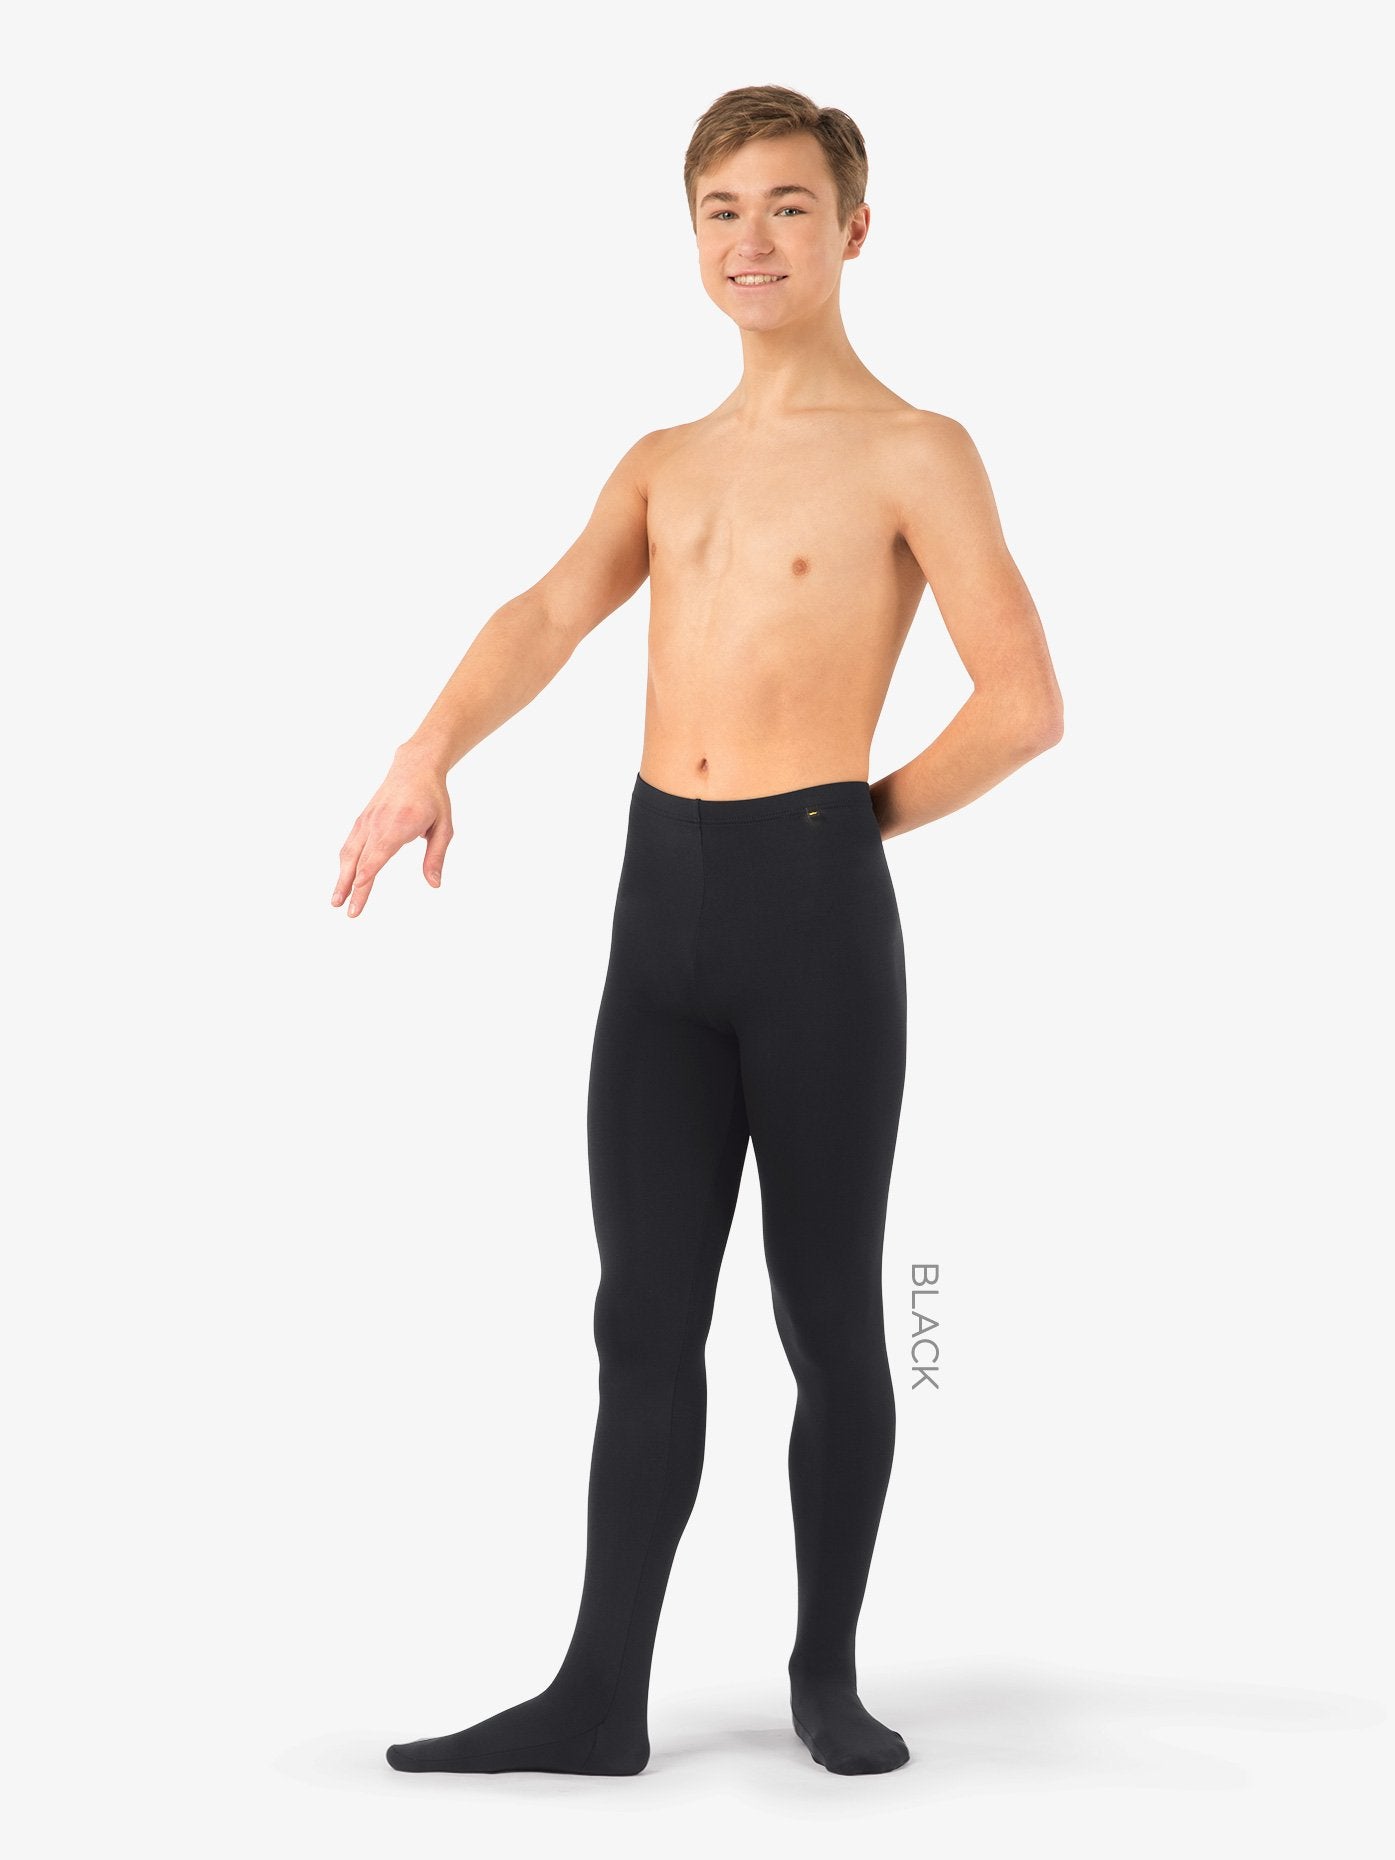 Mens 'Viggo' Convertible Dance Tights: Versatile and comfortable tights for male dancers